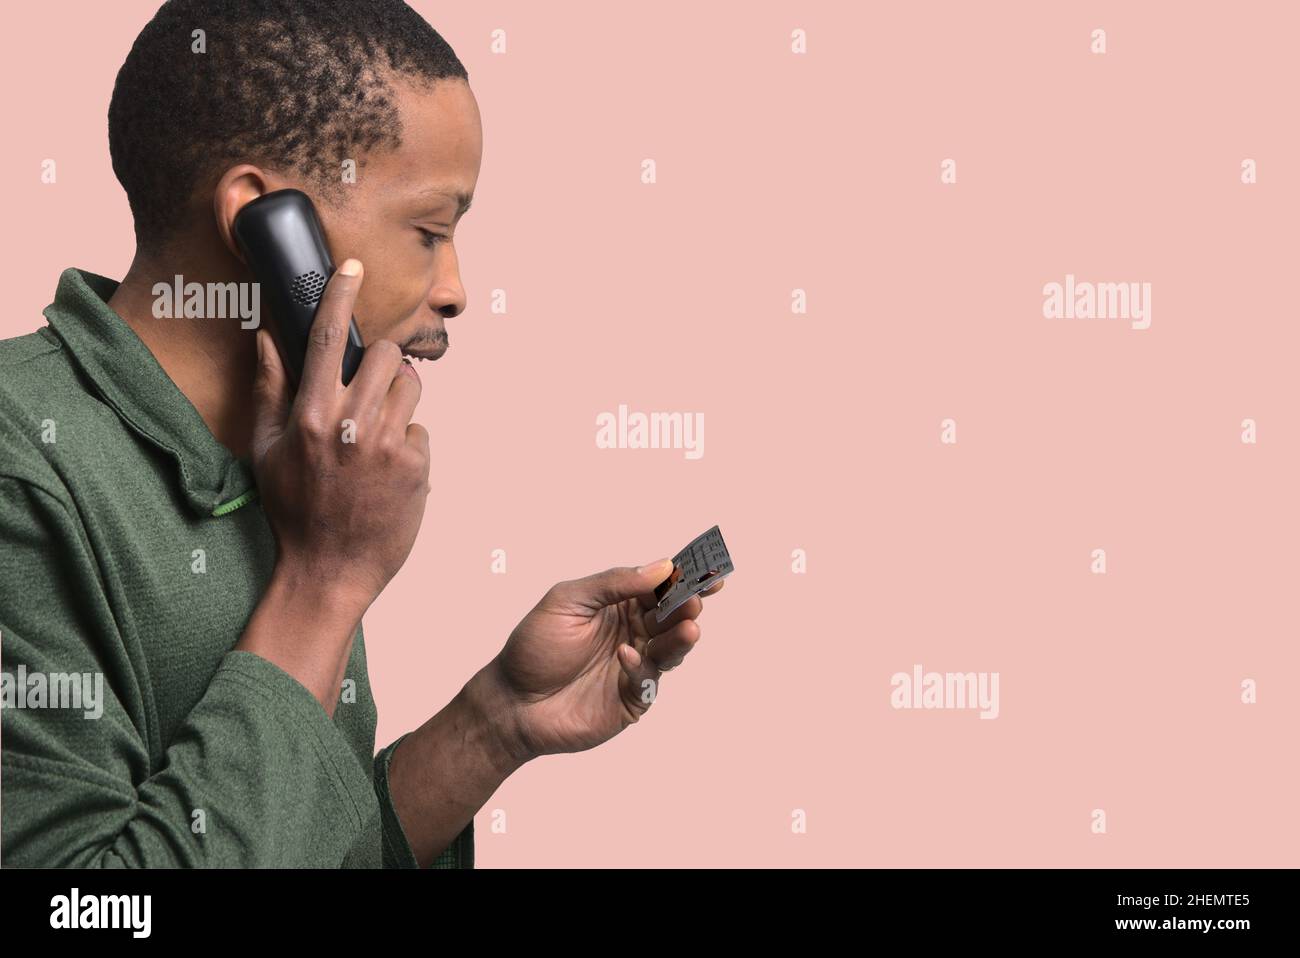 young man talking on the phone and reading a card in his hand on a plain background Stock Photo